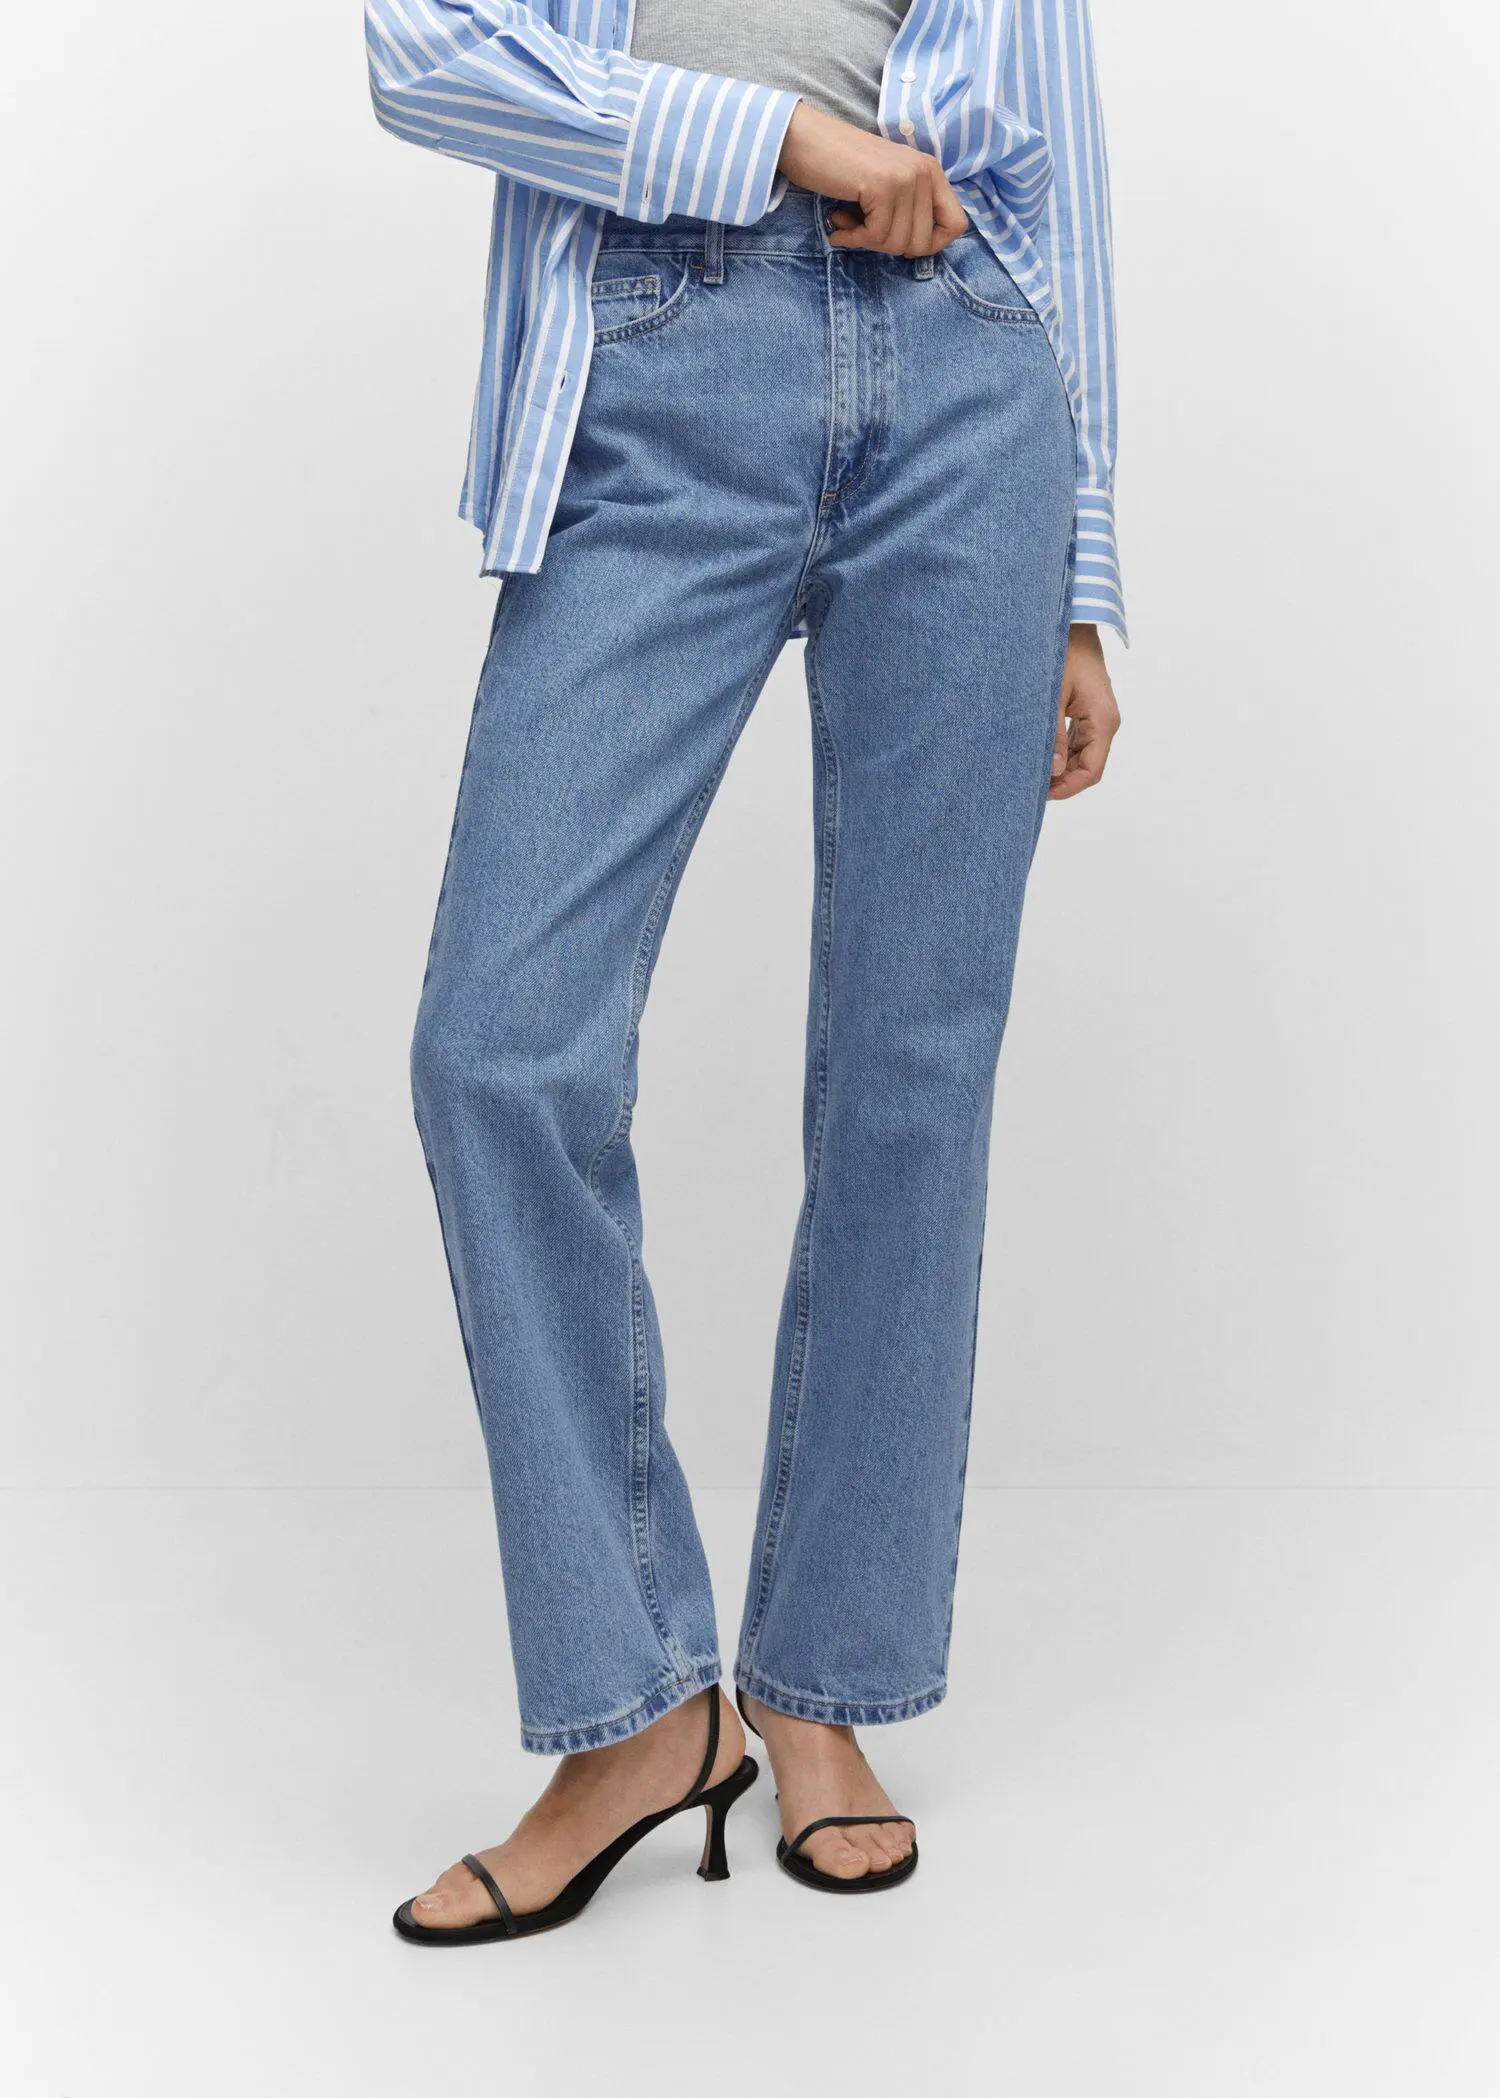 Mango Mid-rise straight jeans. a person wearing a pair of blue jeans. 